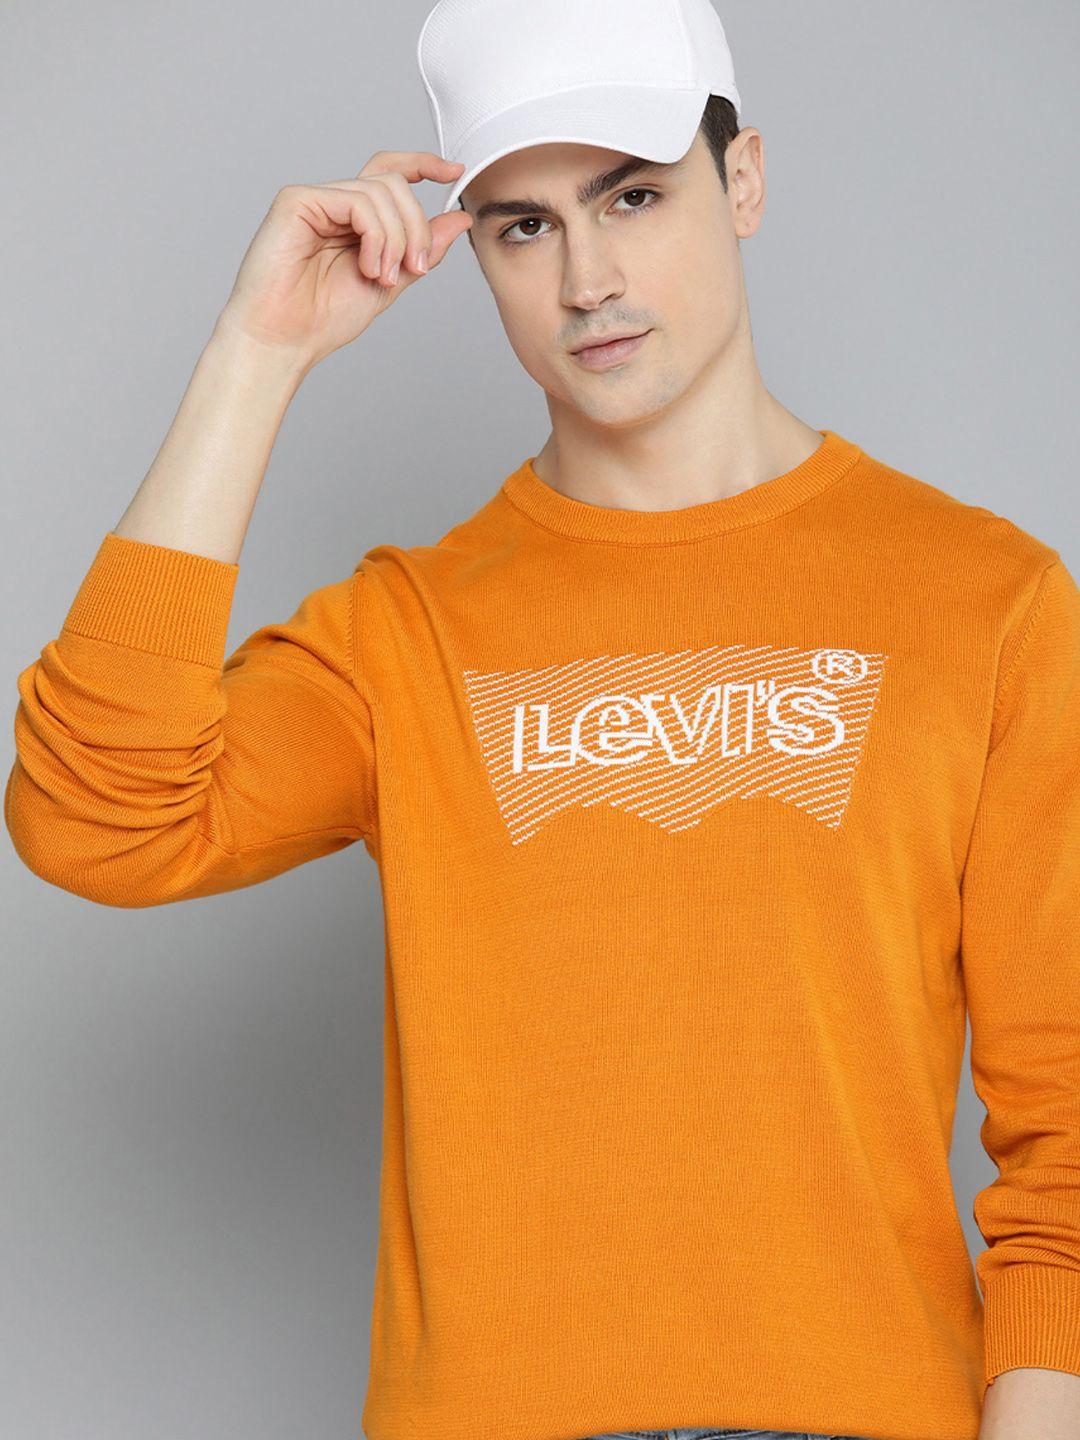 levis-pure-cotton-brand-logo-printed-pullover-sweaters